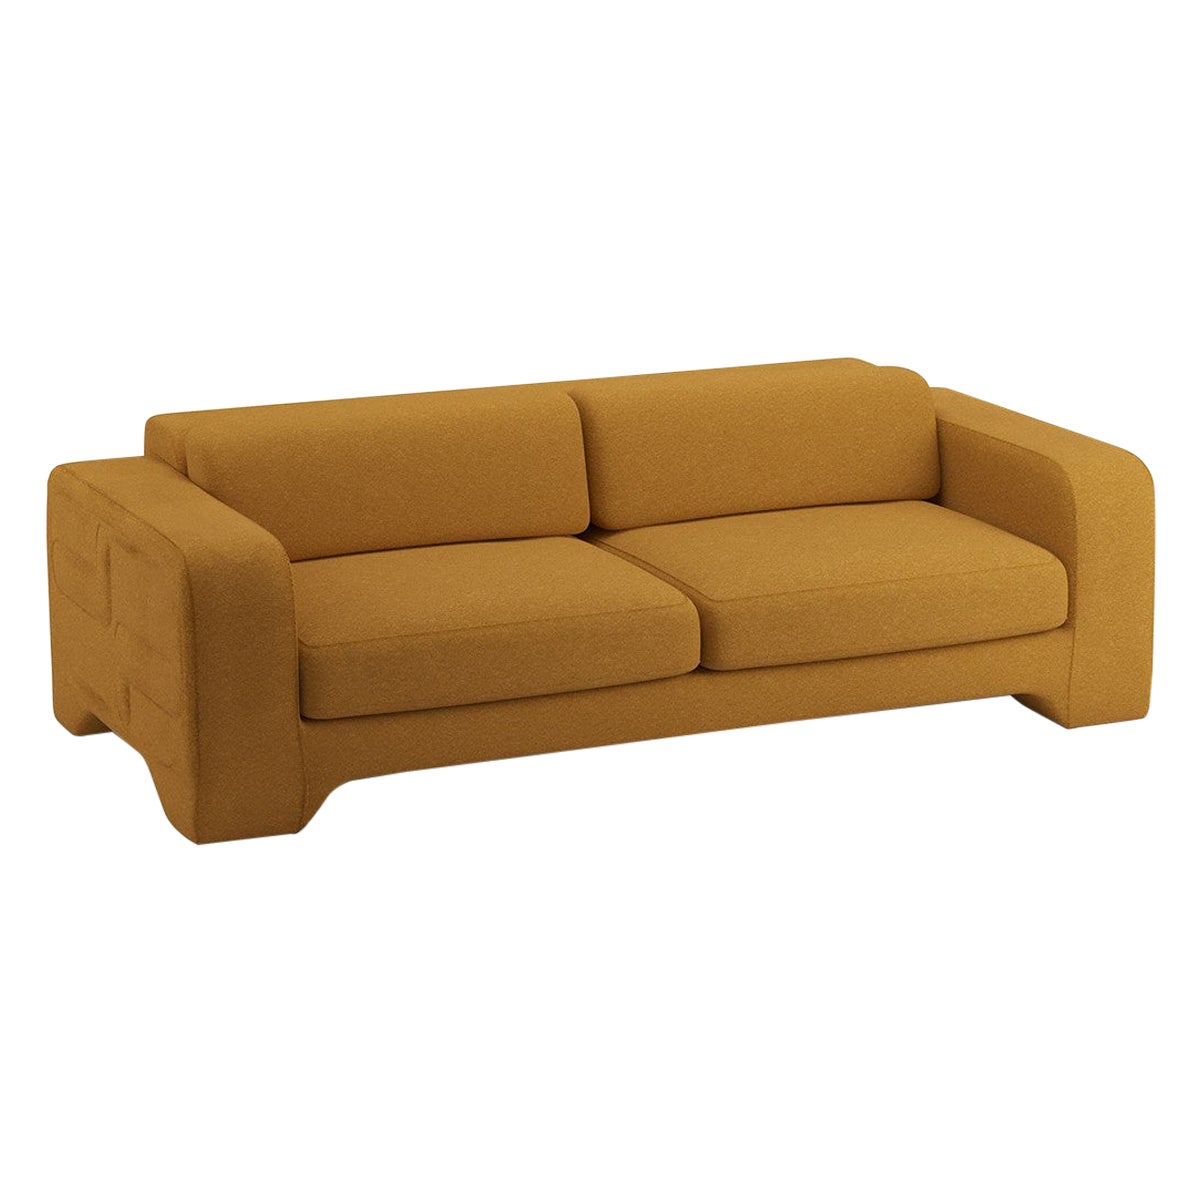 Popus Editions Giovanna 2.5 Seater Sofa in Curry Cork Linen Upholstery For Sale